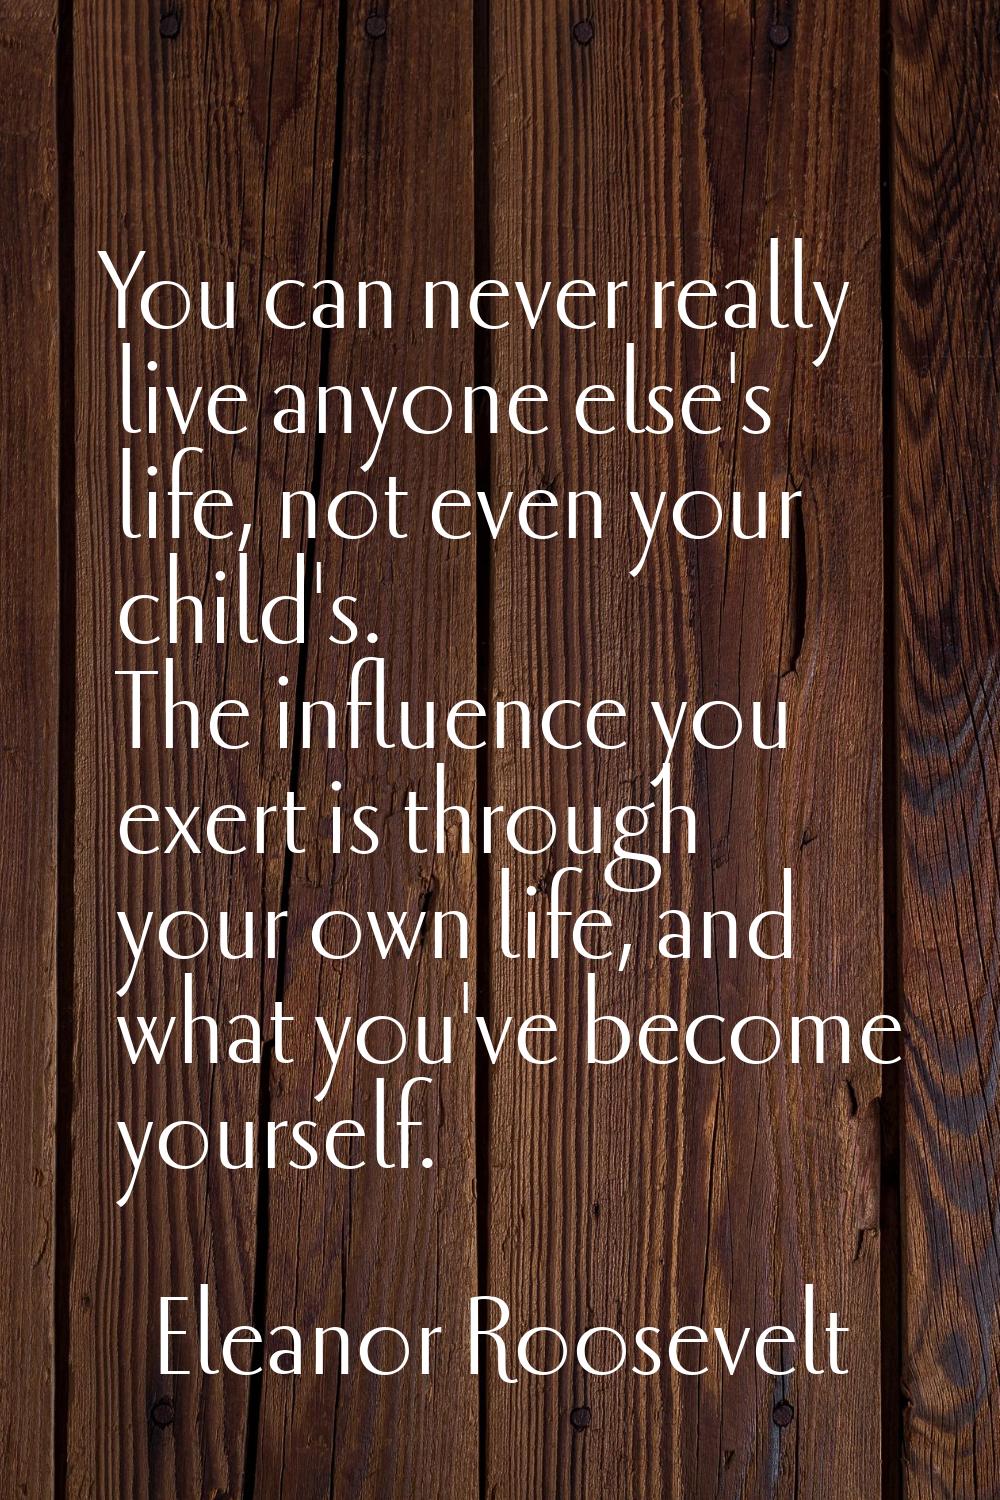 You can never really live anyone else's life, not even your child's. The influence you exert is thr